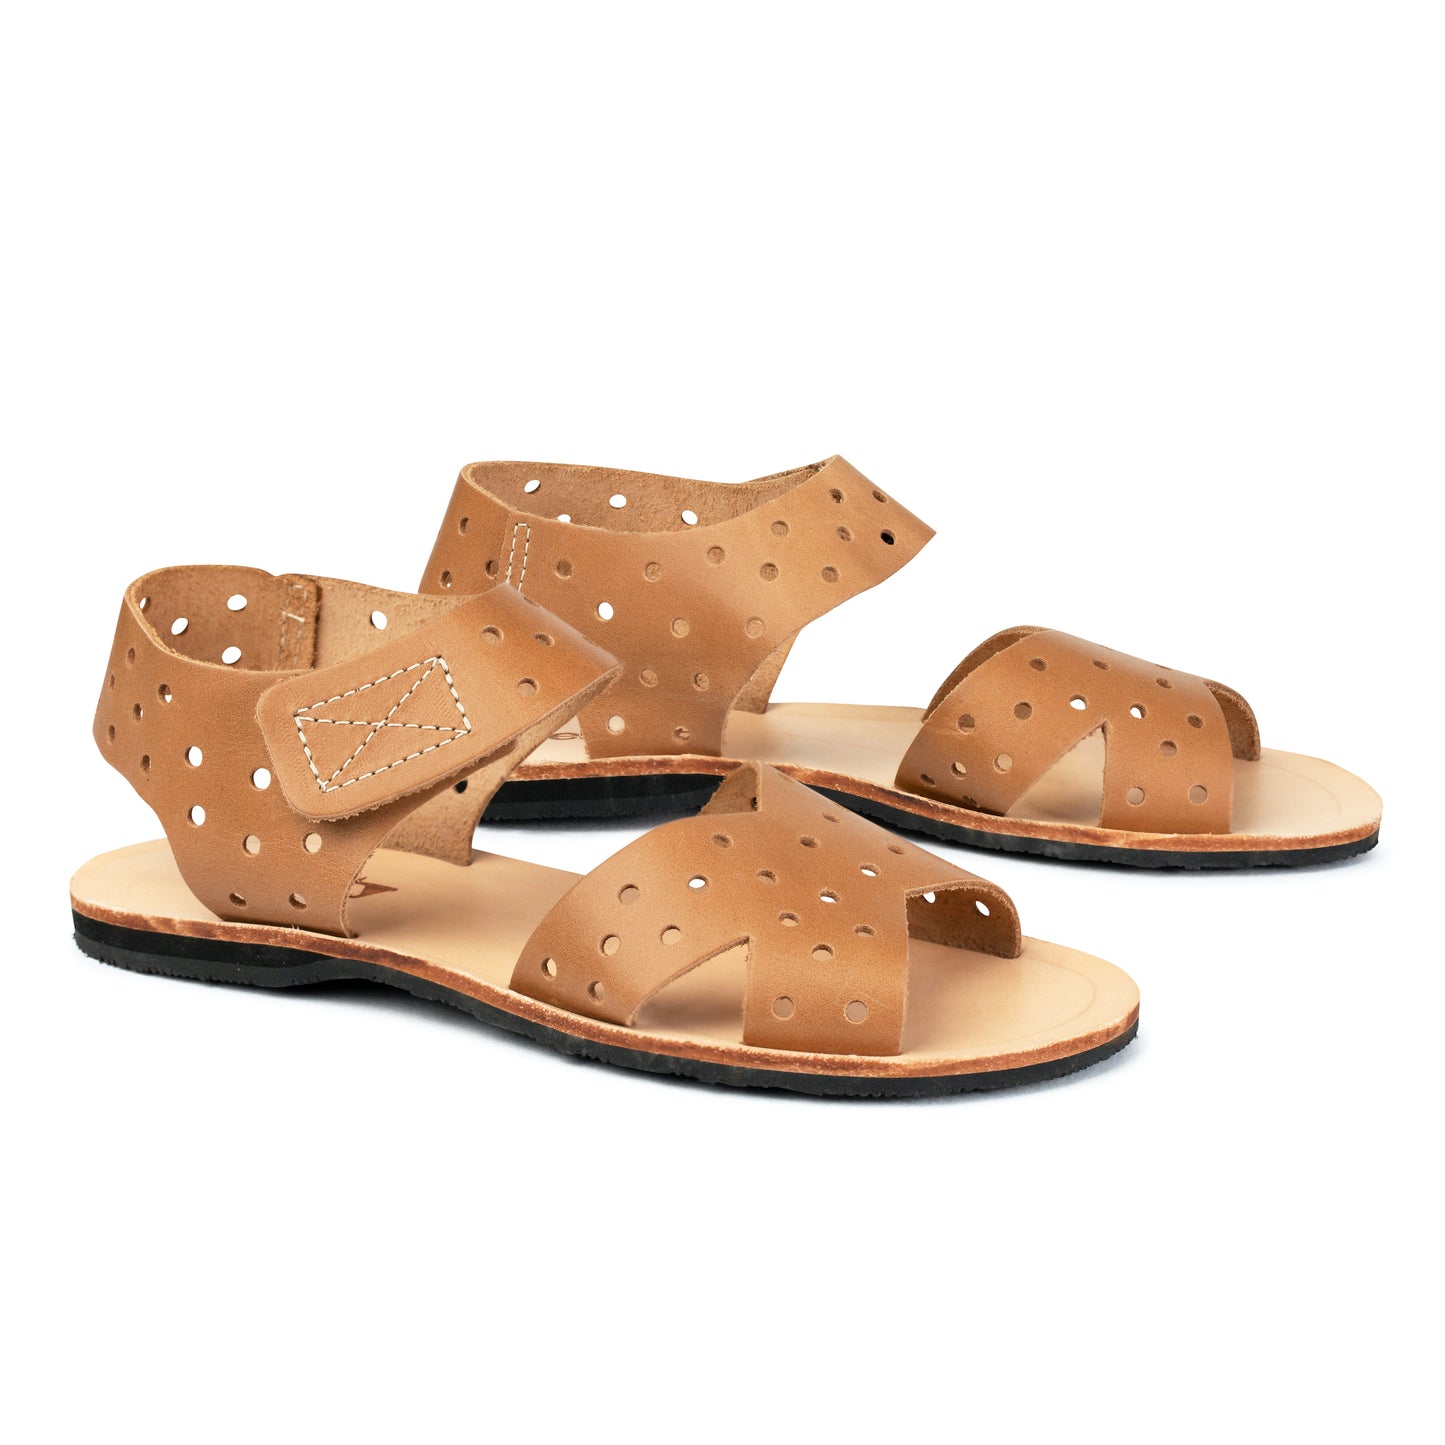 Frances Leather Sandal - Light Brown Perforated